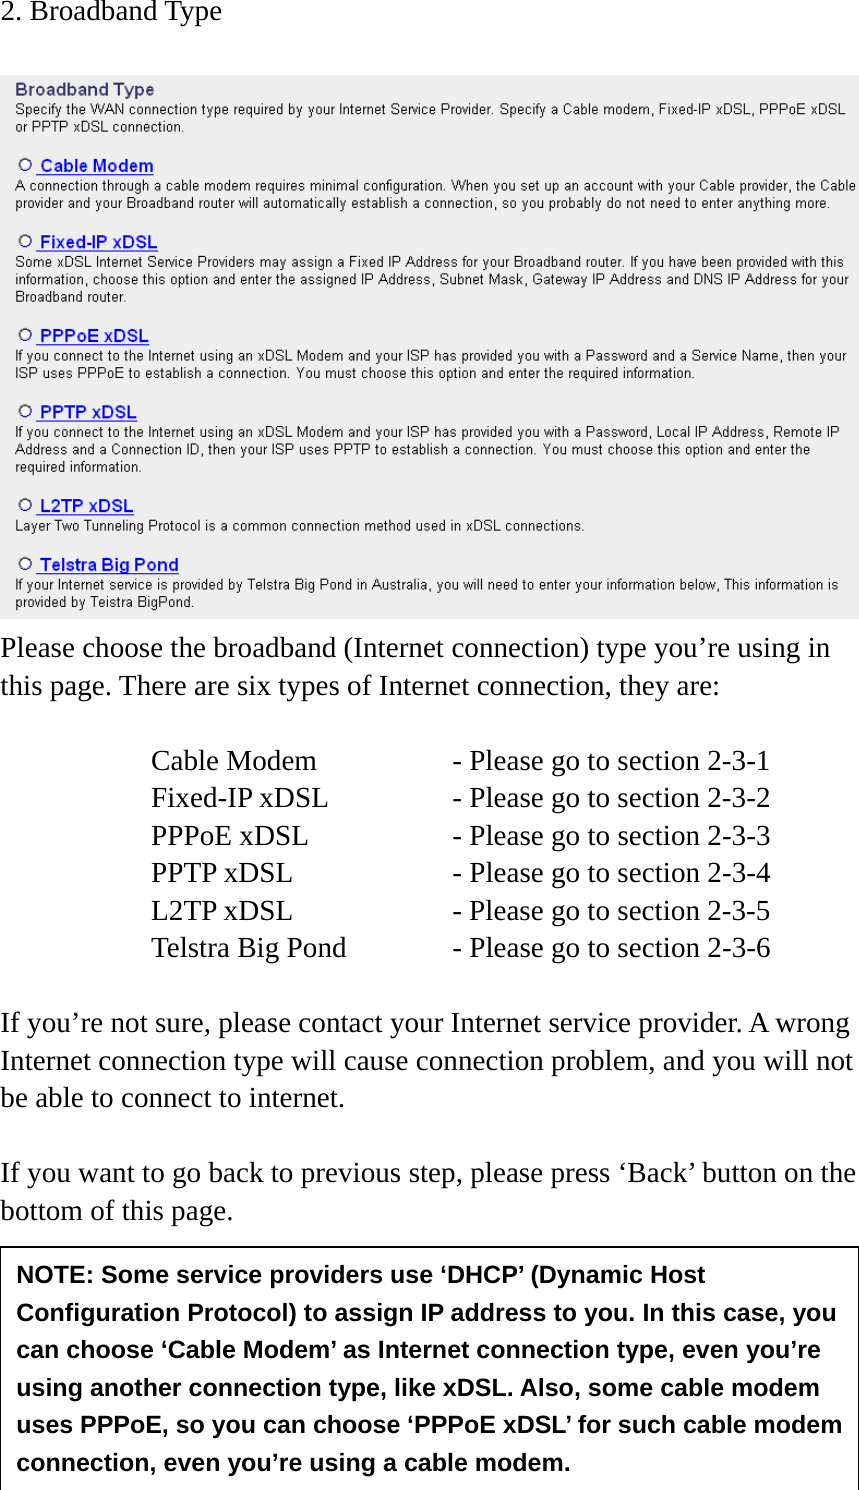 24 2. Broadband Type   Please choose the broadband (Internet connection) type you’re using in this page. There are six types of Internet connection, they are:  Cable Modem      - Please go to section 2-3-1 Fixed-IP xDSL      - Please go to section 2-3-2 PPPoE xDSL      - Please go to section 2-3-3 PPTP xDSL       - Please go to section 2-3-4 L2TP xDSL       - Please go to section 2-3-5 Telstra Big Pond     - Please go to section 2-3-6  If you’re not sure, please contact your Internet service provider. A wrong Internet connection type will cause connection problem, and you will not be able to connect to internet.  If you want to go back to previous step, please press ‘Back’ button on the bottom of this page.      NOTE: Some service providers use ‘DHCP’ (Dynamic Host Configuration Protocol) to assign IP address to you. In this case, you can choose ‘Cable Modem’ as Internet connection type, even you’re using another connection type, like xDSL. Also, some cable modem uses PPPoE, so you can choose ‘PPPoE xDSL’ for such cable modem connection, even you’re using a cable modem. 